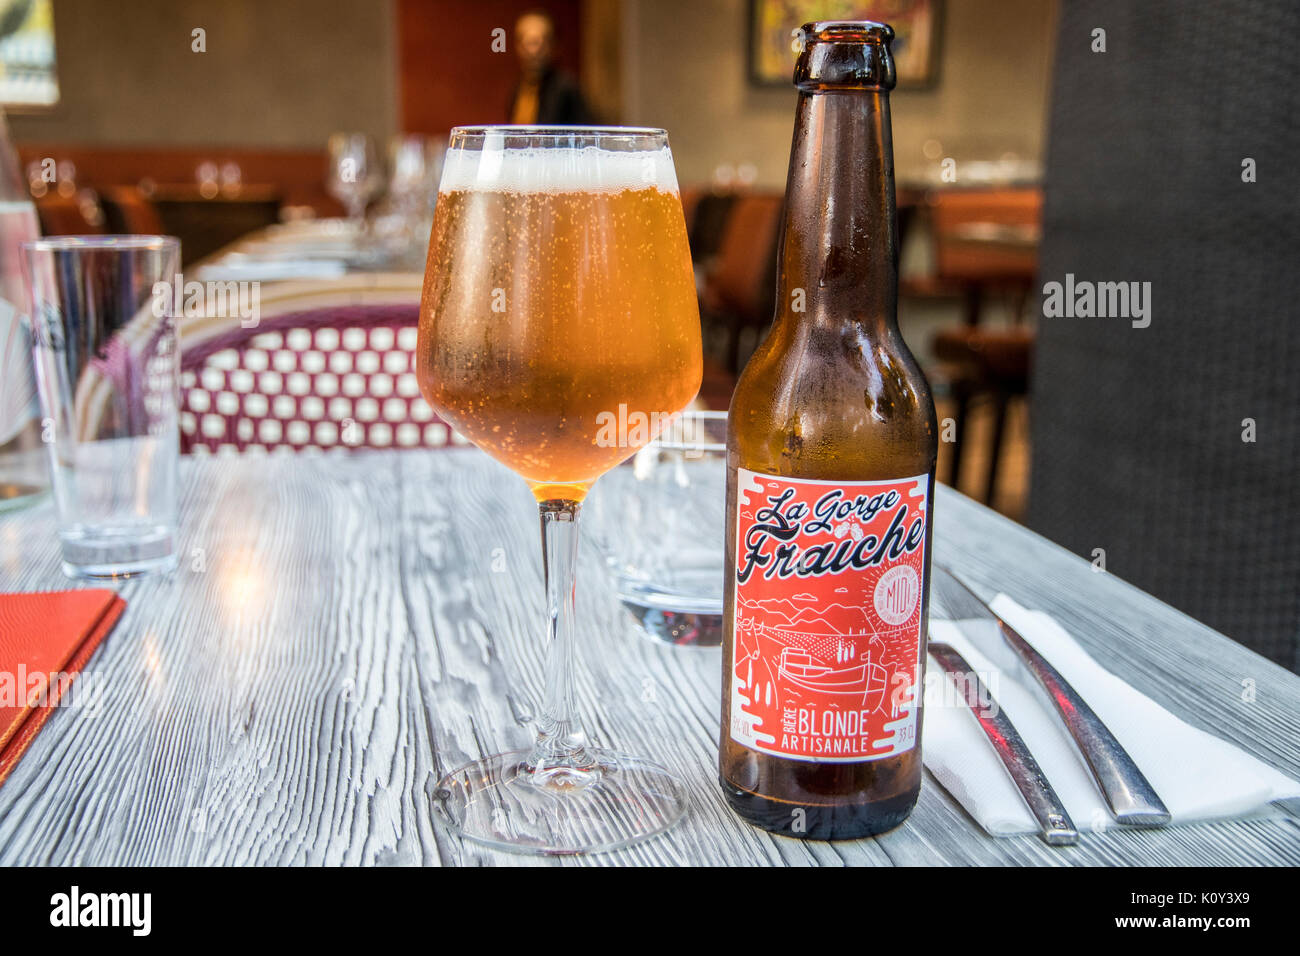 Still life in a restaurant with a bottle of La Gorge Frauche, a craft beer from Beziers, France Stock Photo